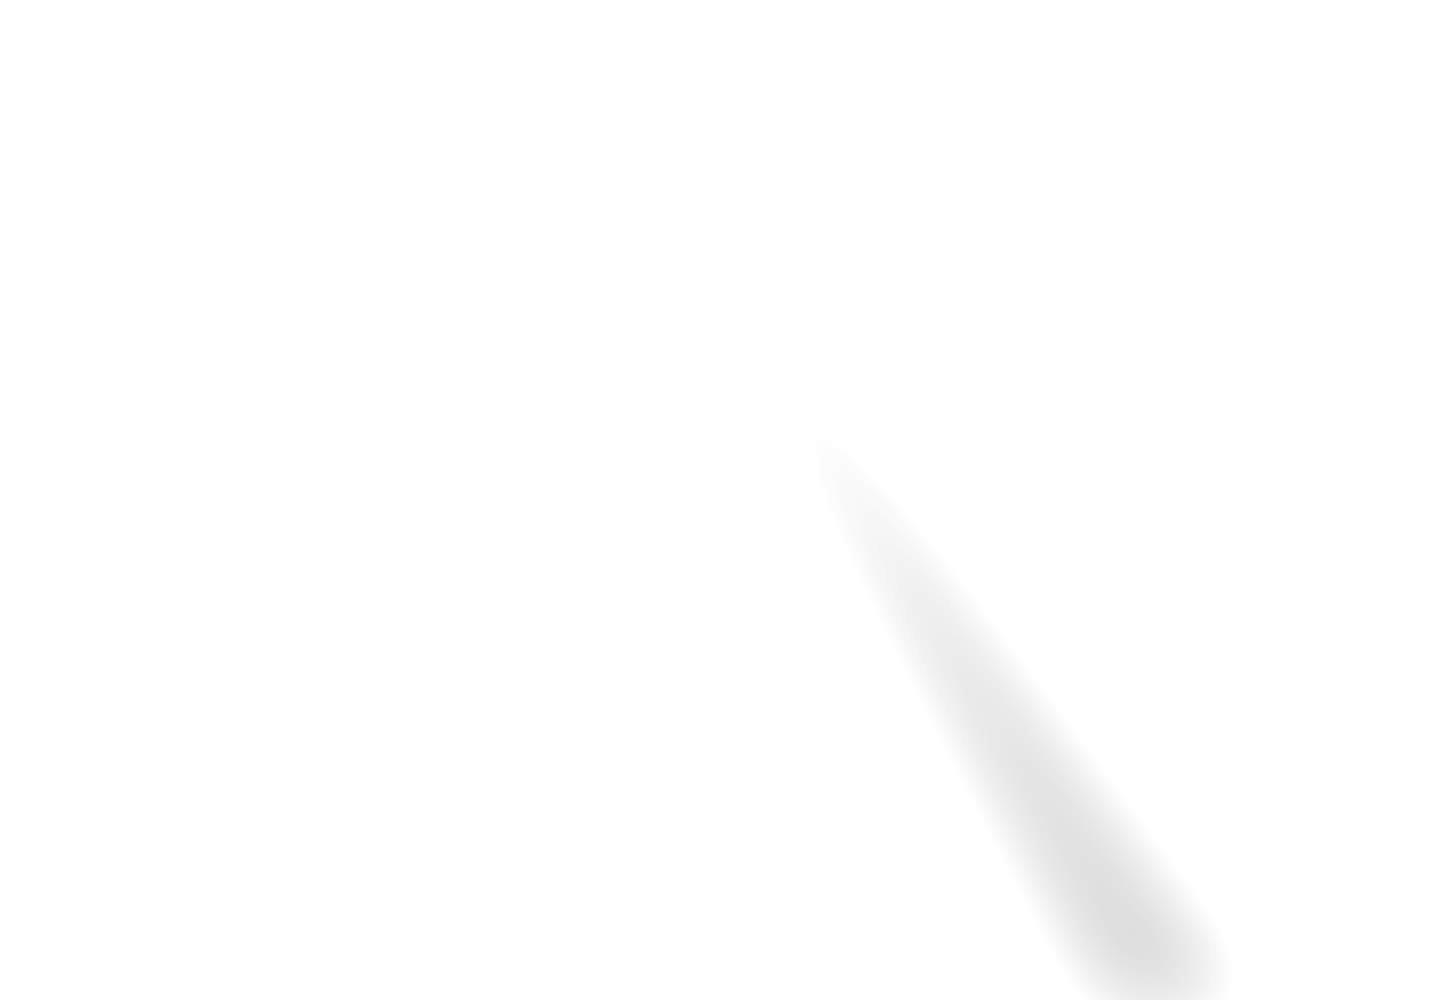 Rays Of Light PNG Free Image